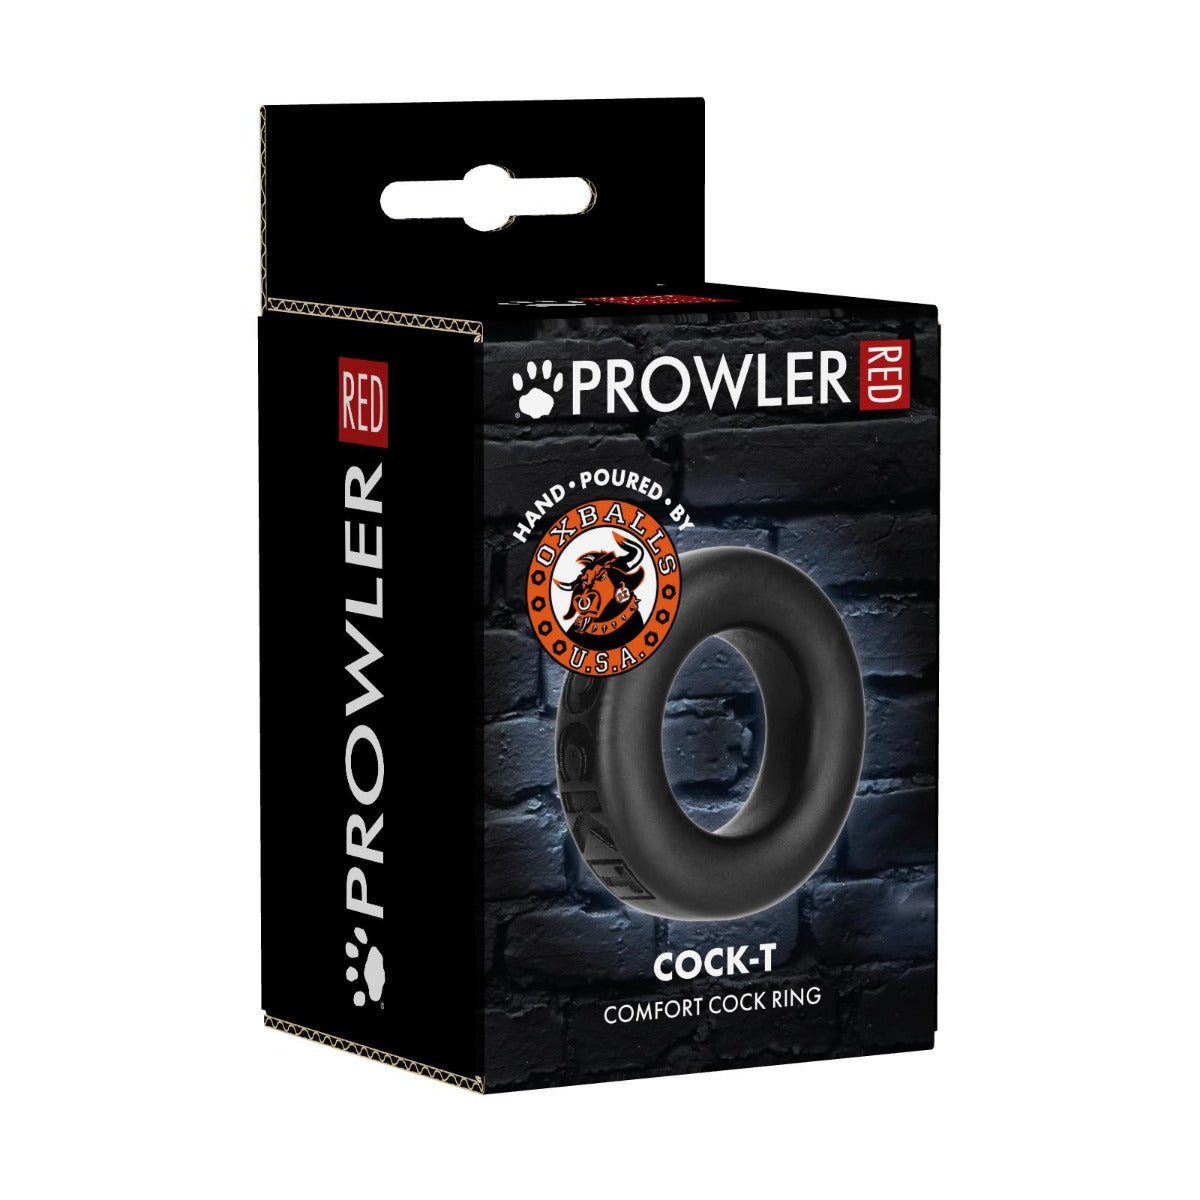 Prowler RED Cock-T By Oxballs Black (7020774588580)